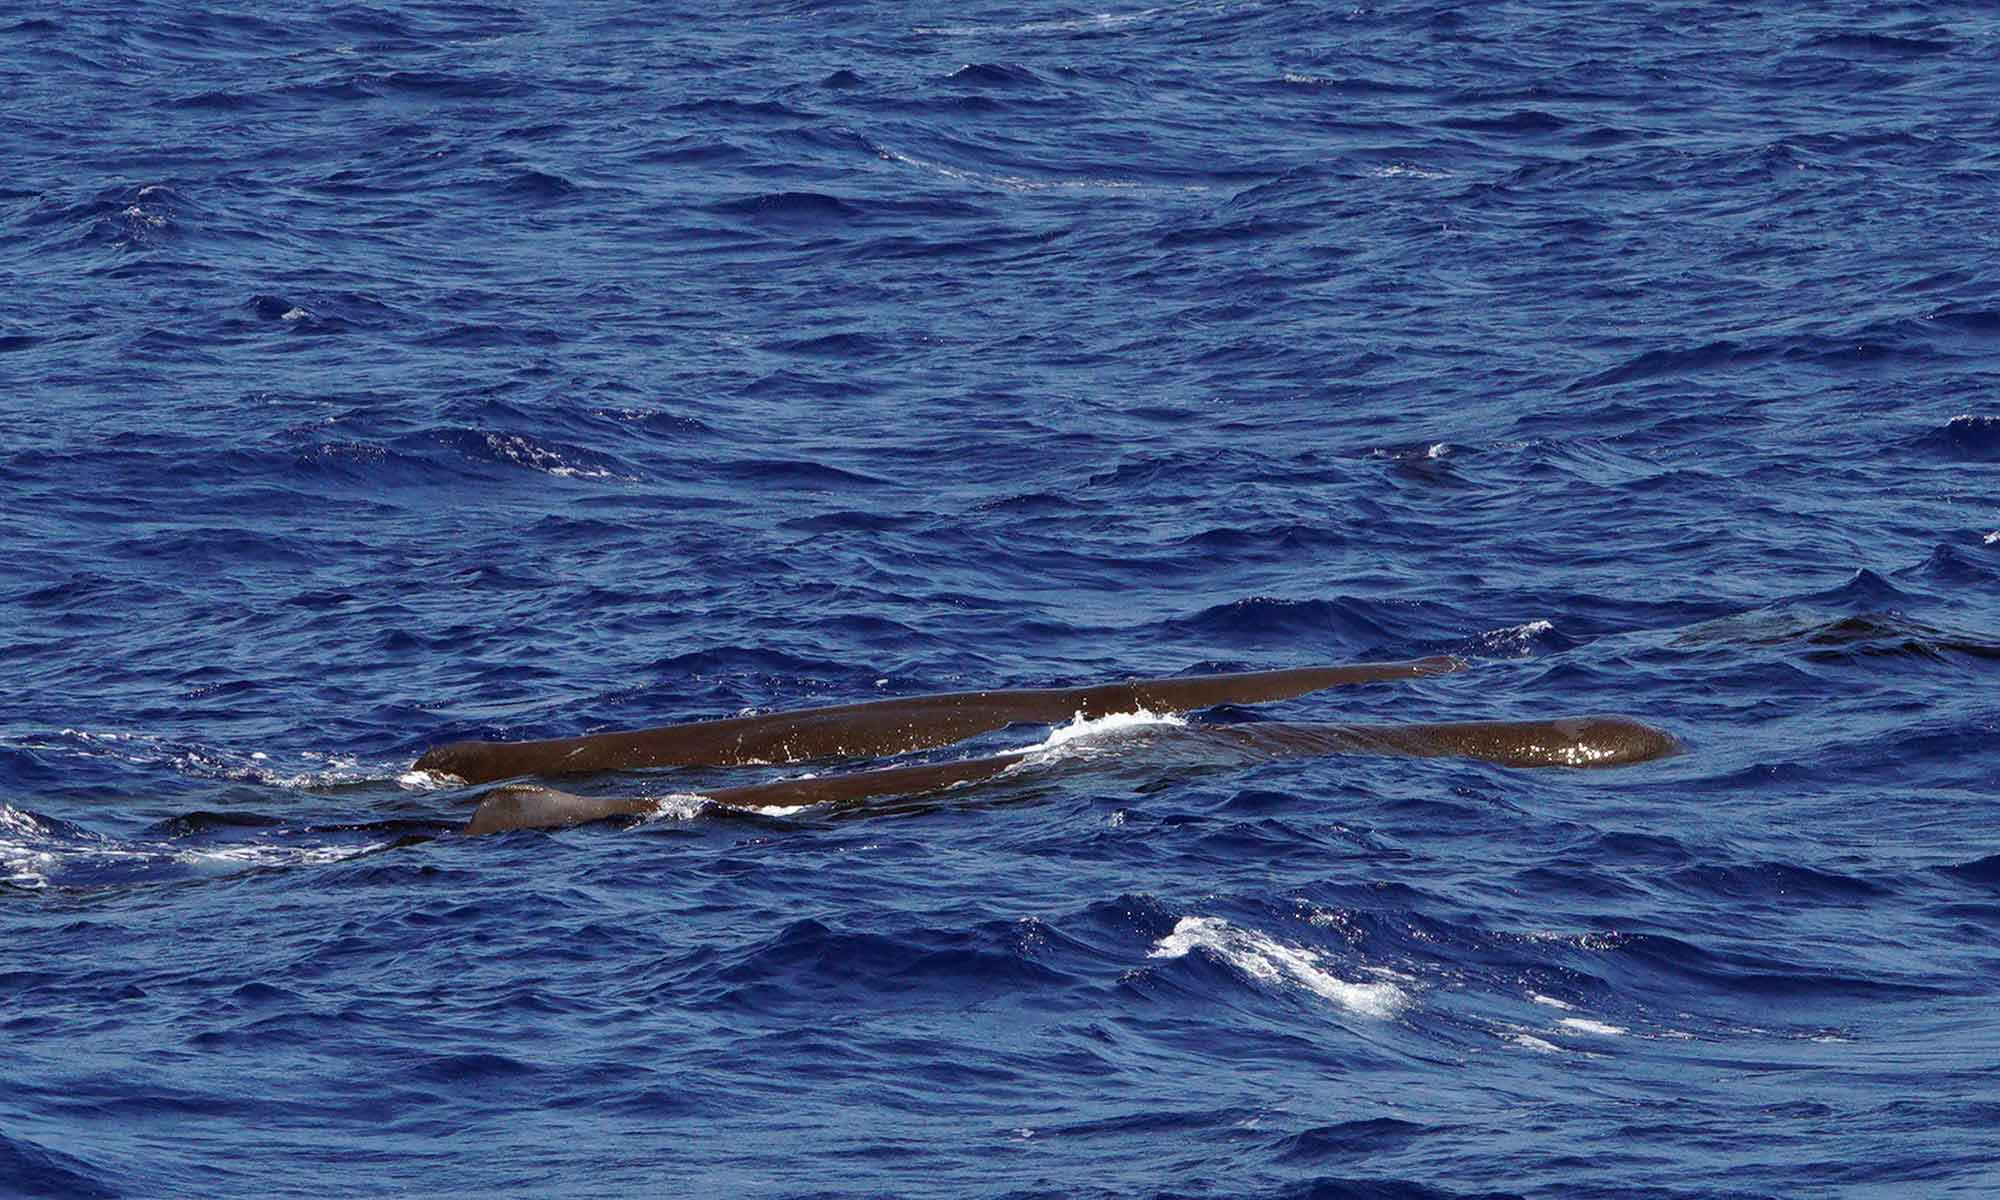 Sperm whales were more abundant on our whale watching tours during October.